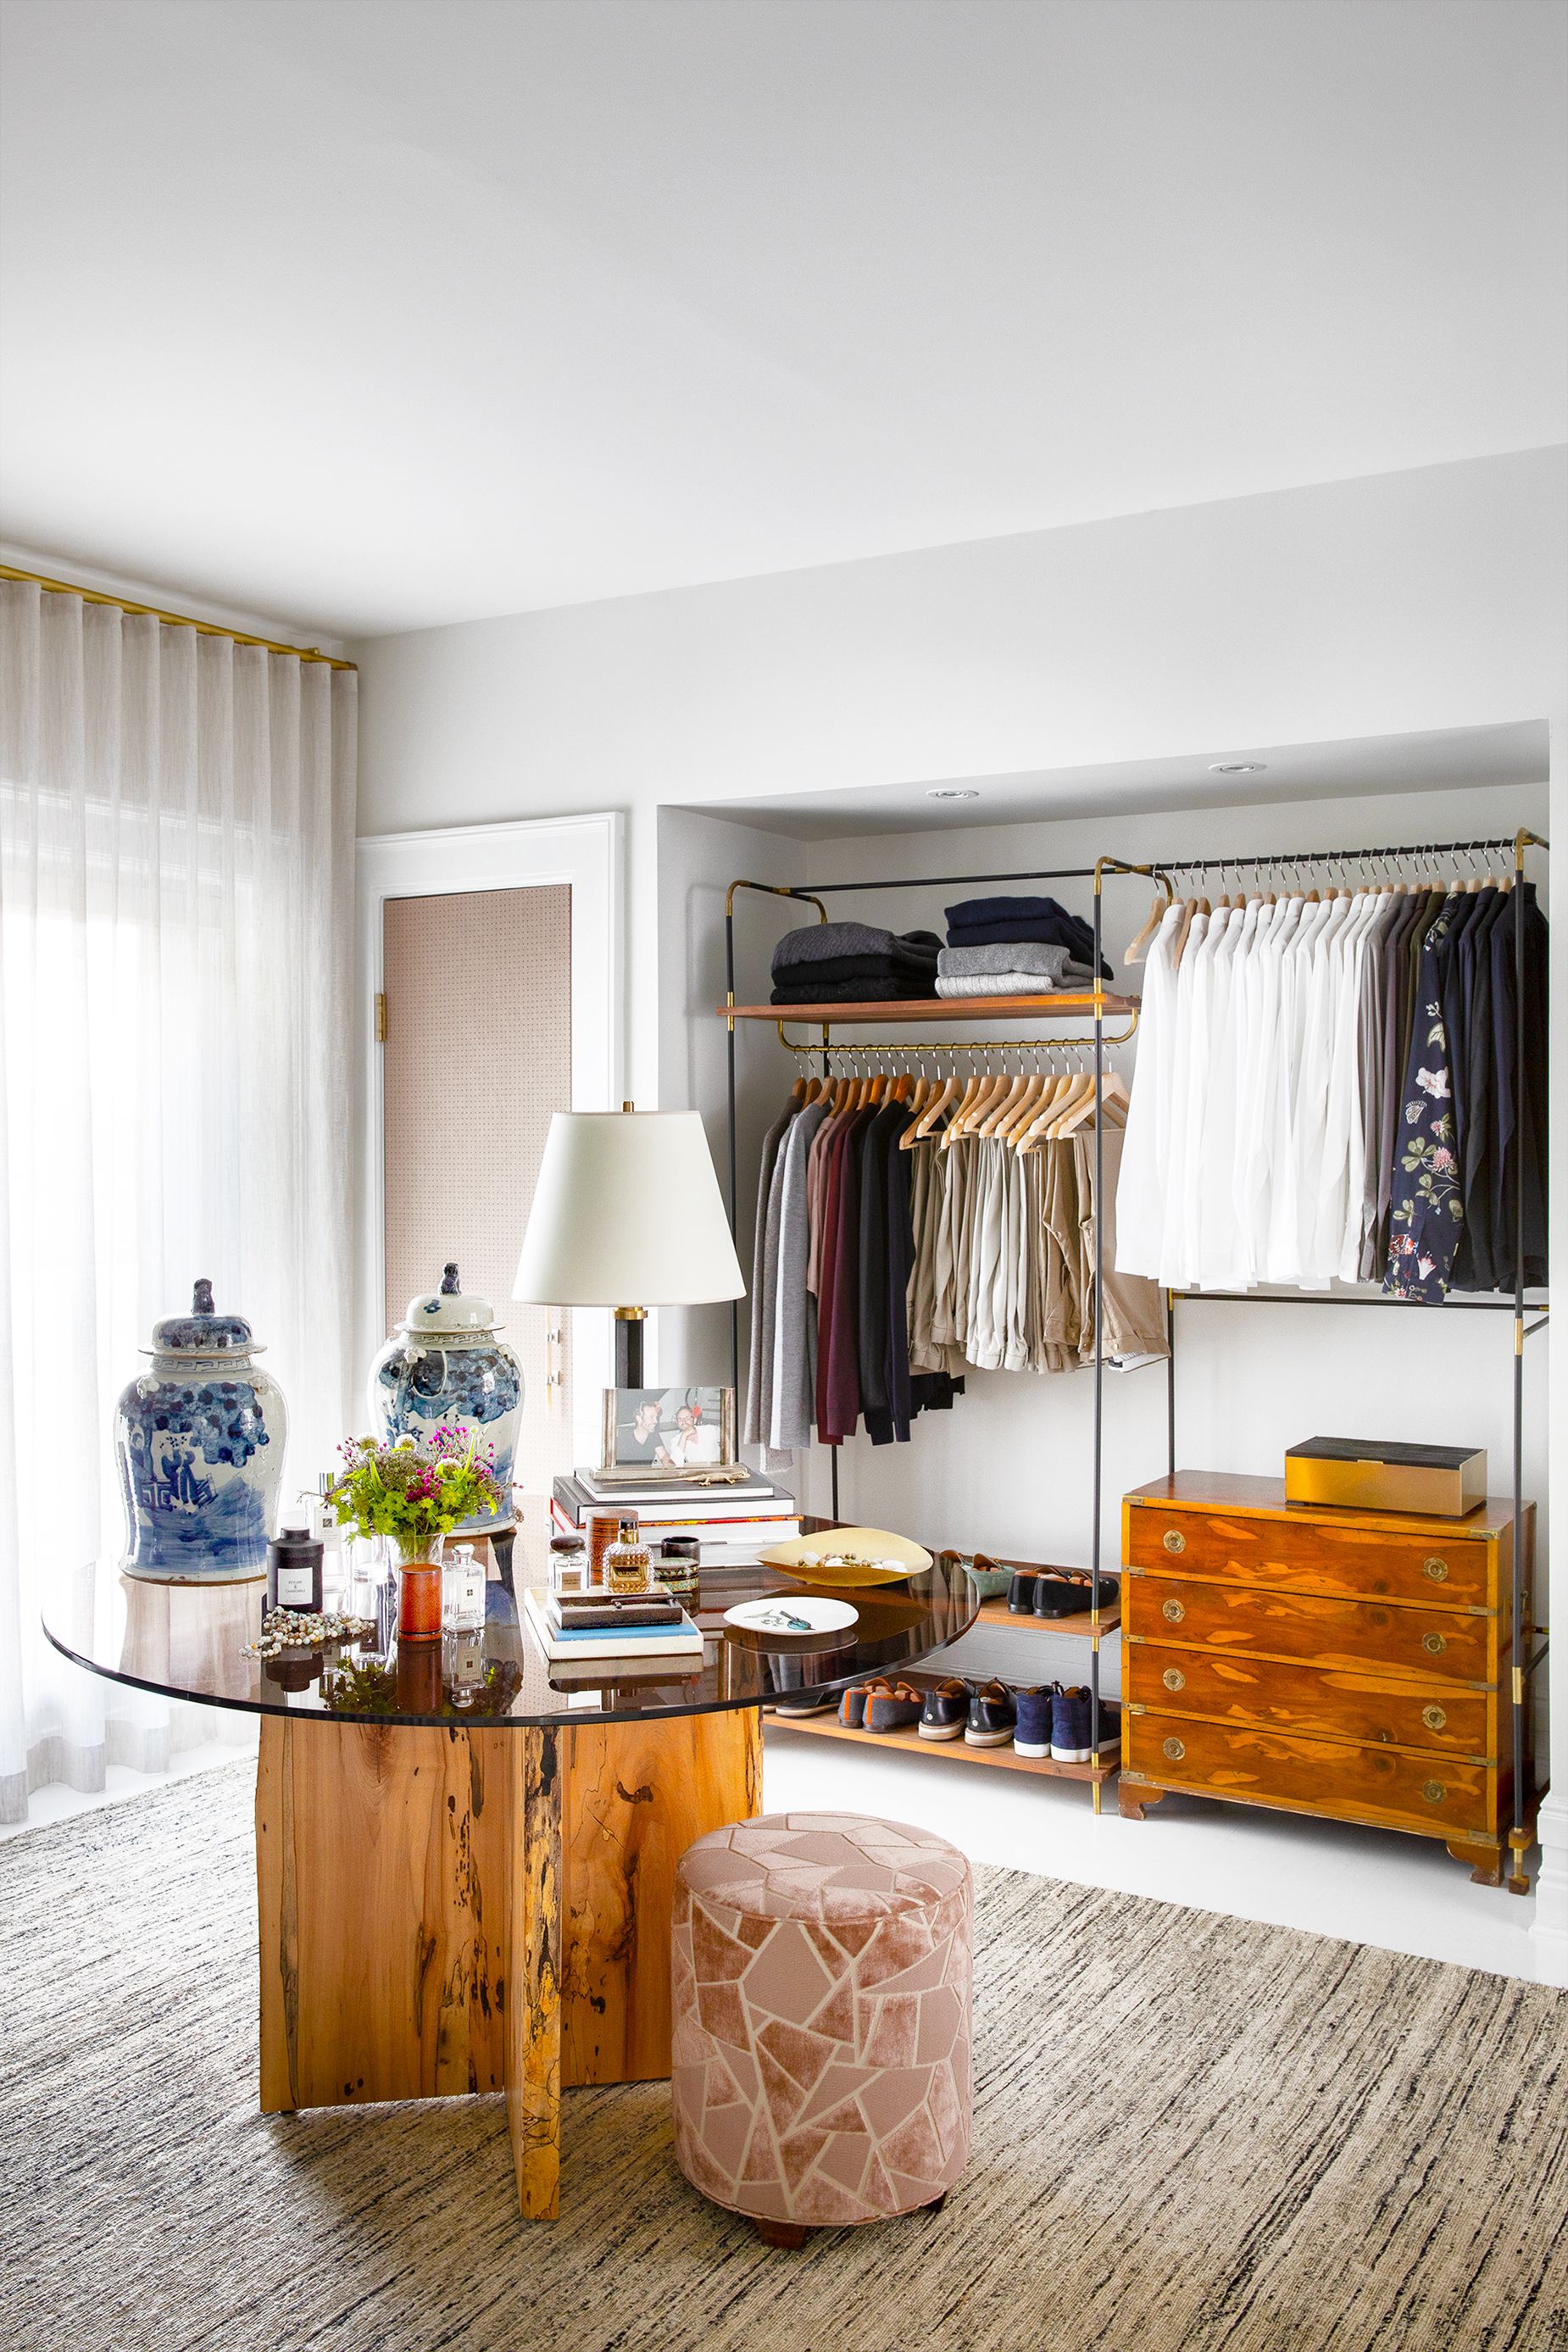 Small Closet Ideas: 21 Ways to Make Better Use of Your Space - Bob